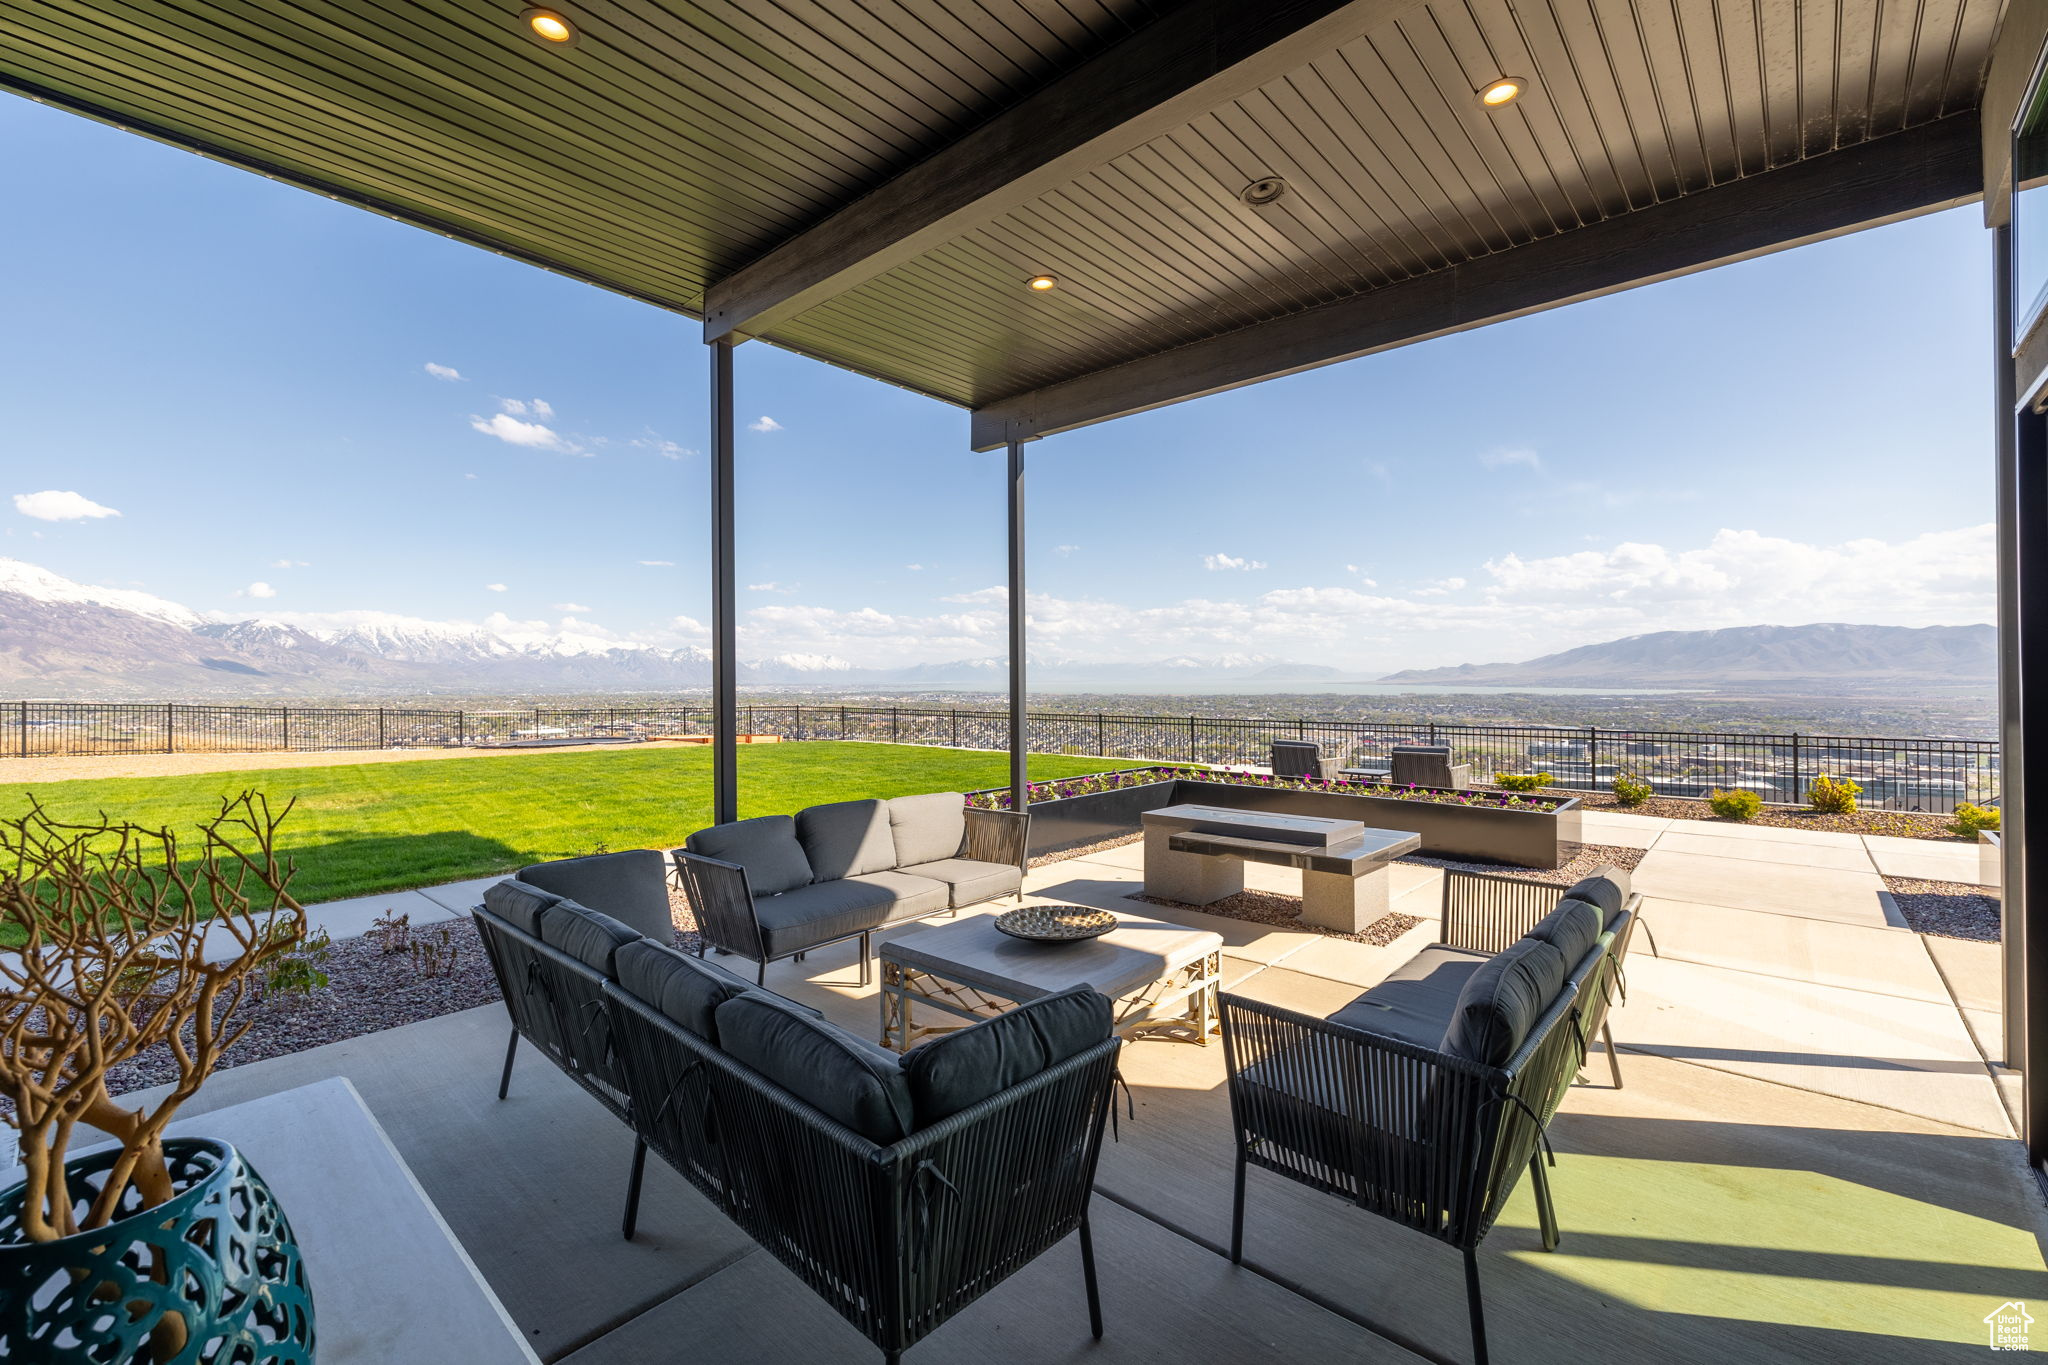 View of patio / terrace featuring a mountain view and an outdoor living space with a fire pit